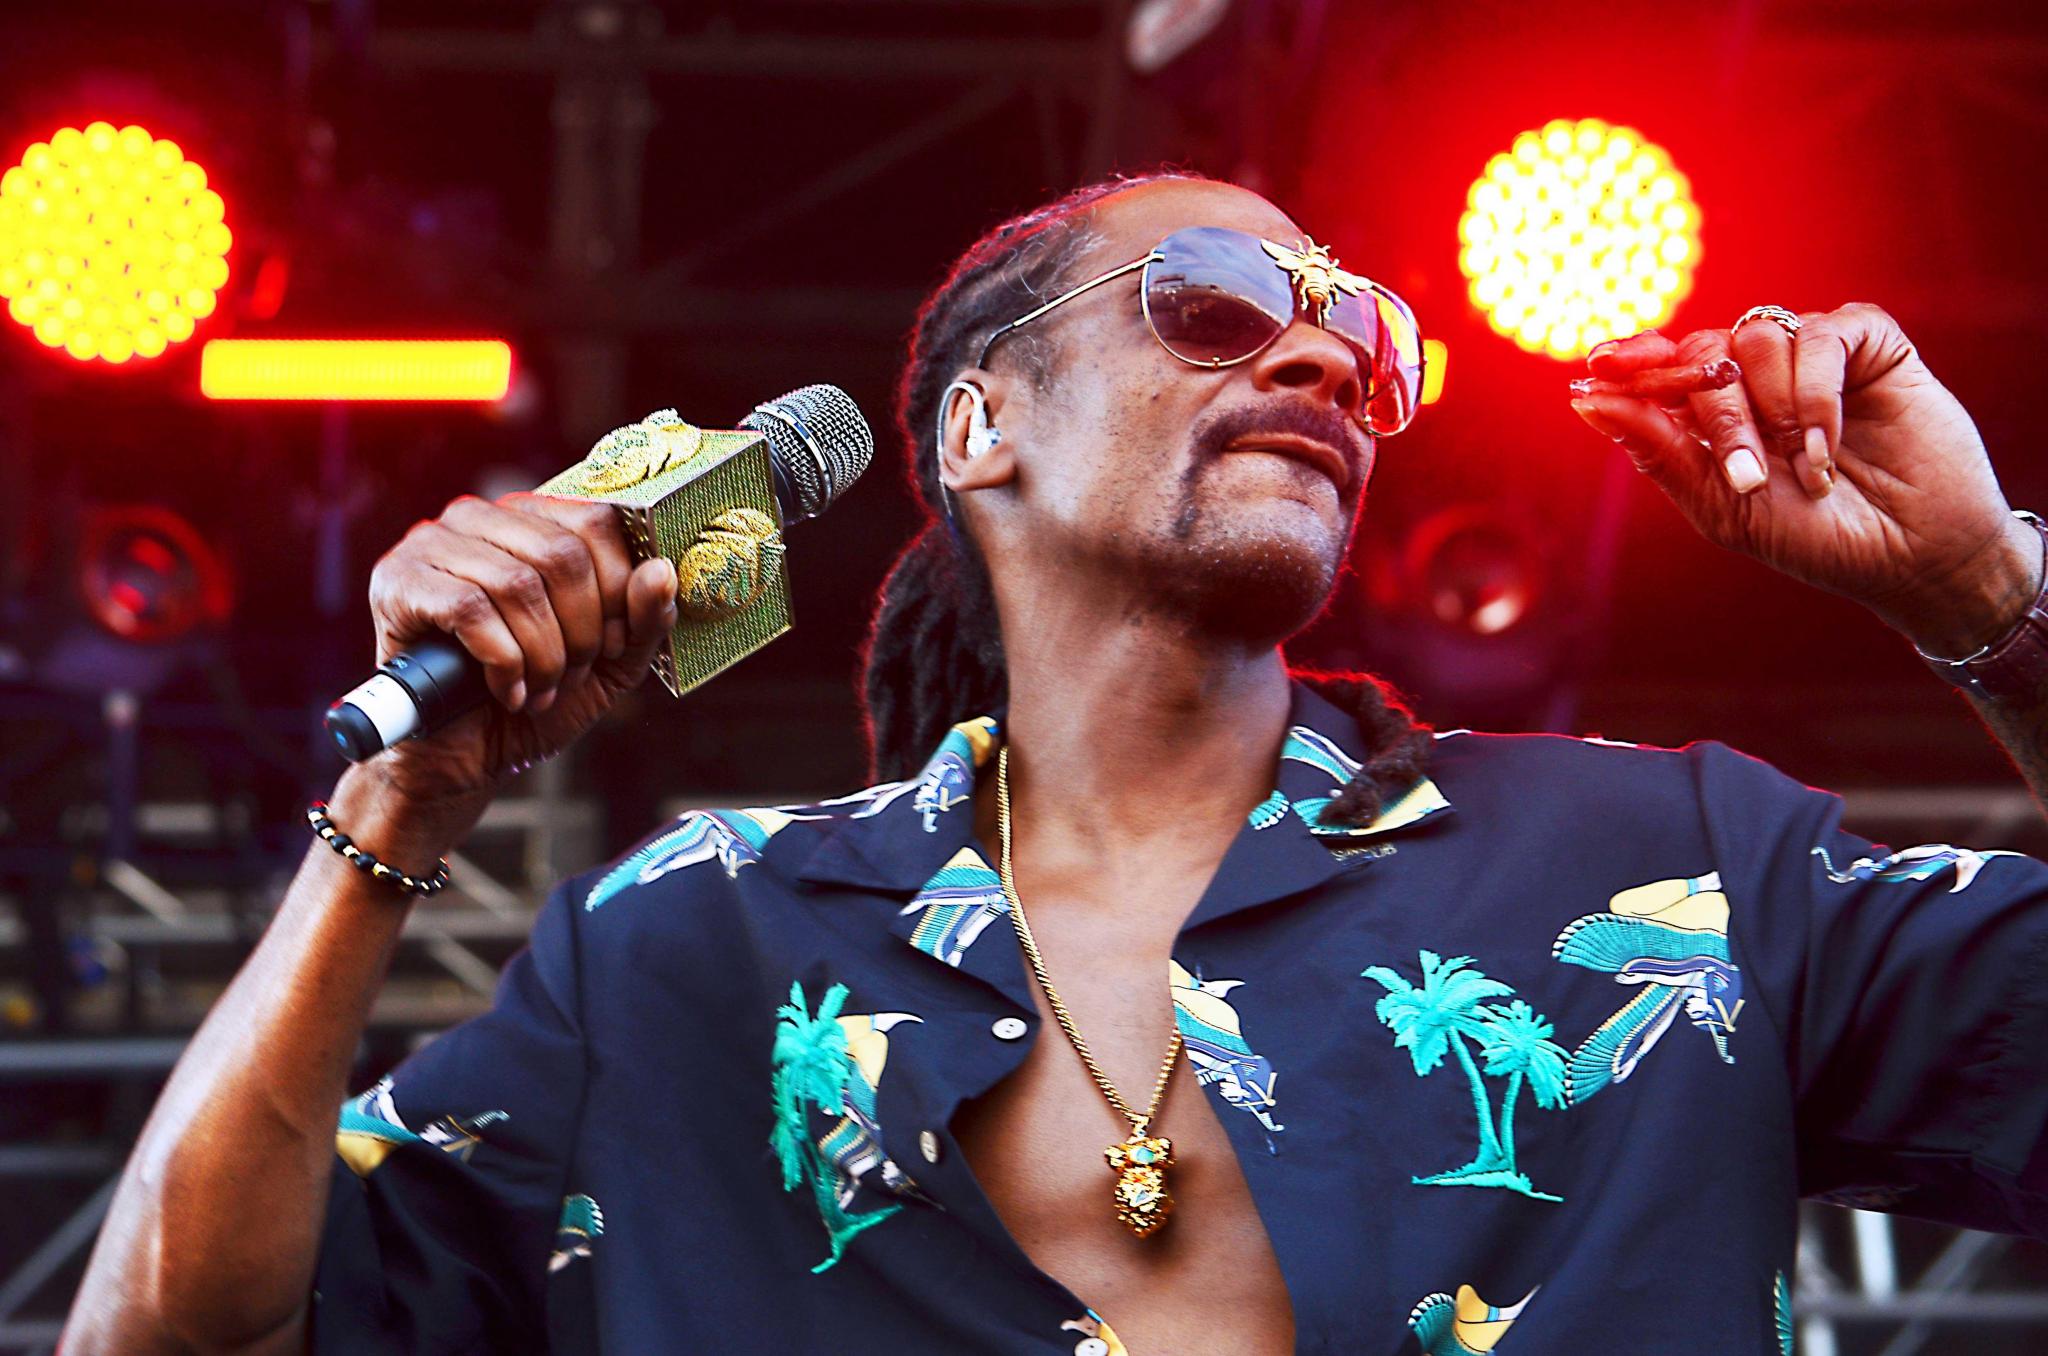 Snoop Dogg - 2018 Float Festival San Marcos, TX. Photo by Toy Mendez